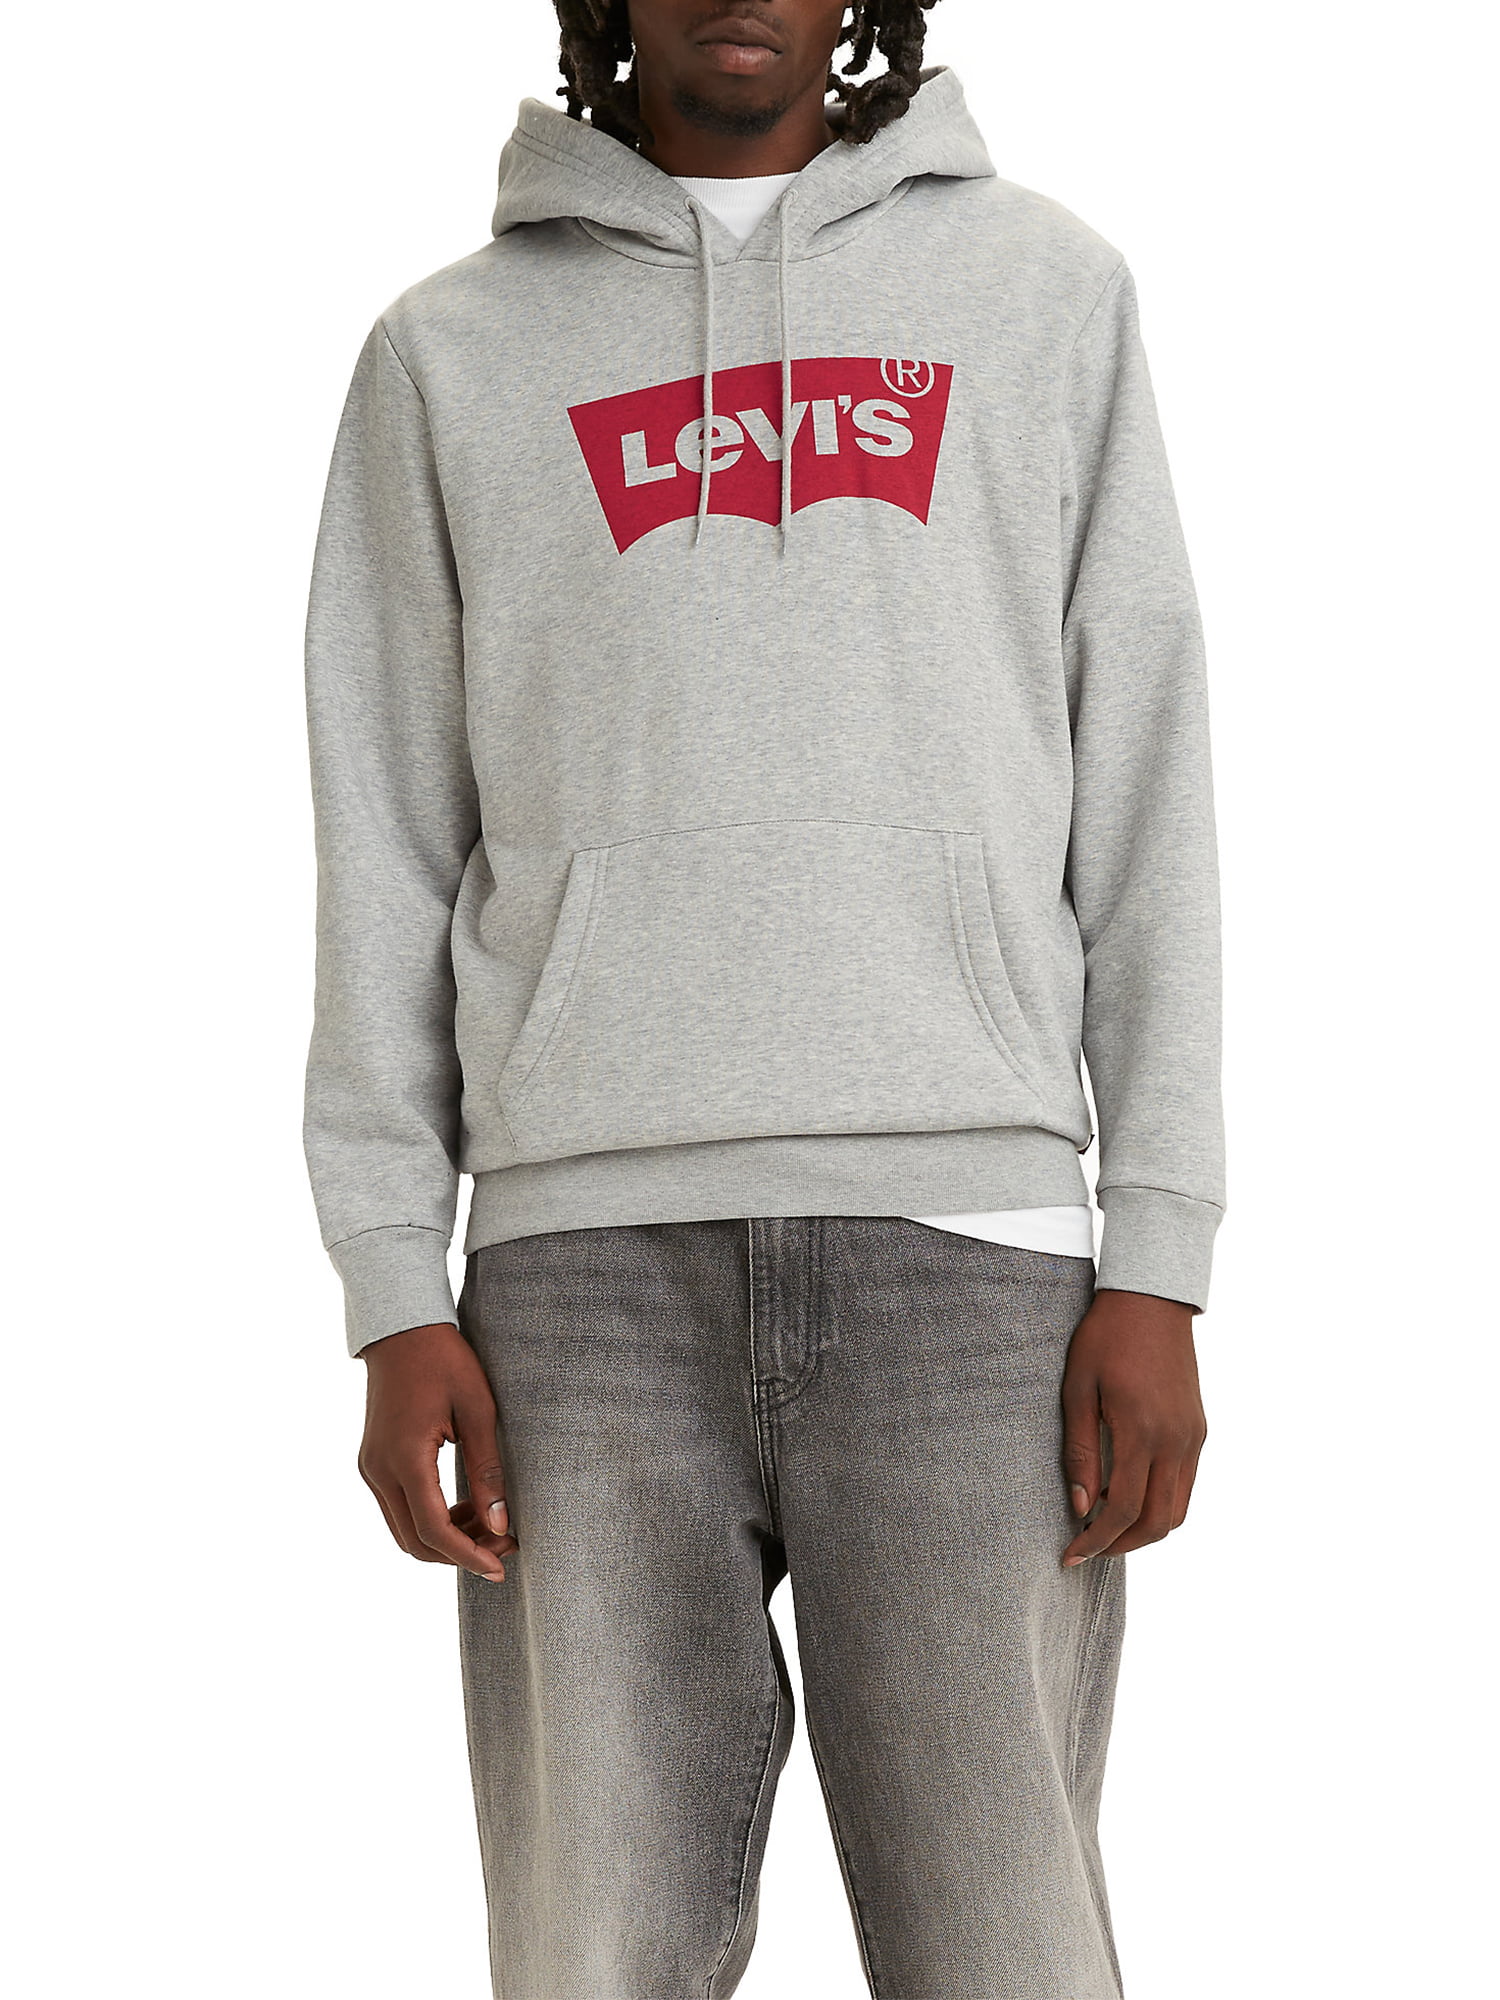 Levi's Men's Graphic Tall Hoodie 